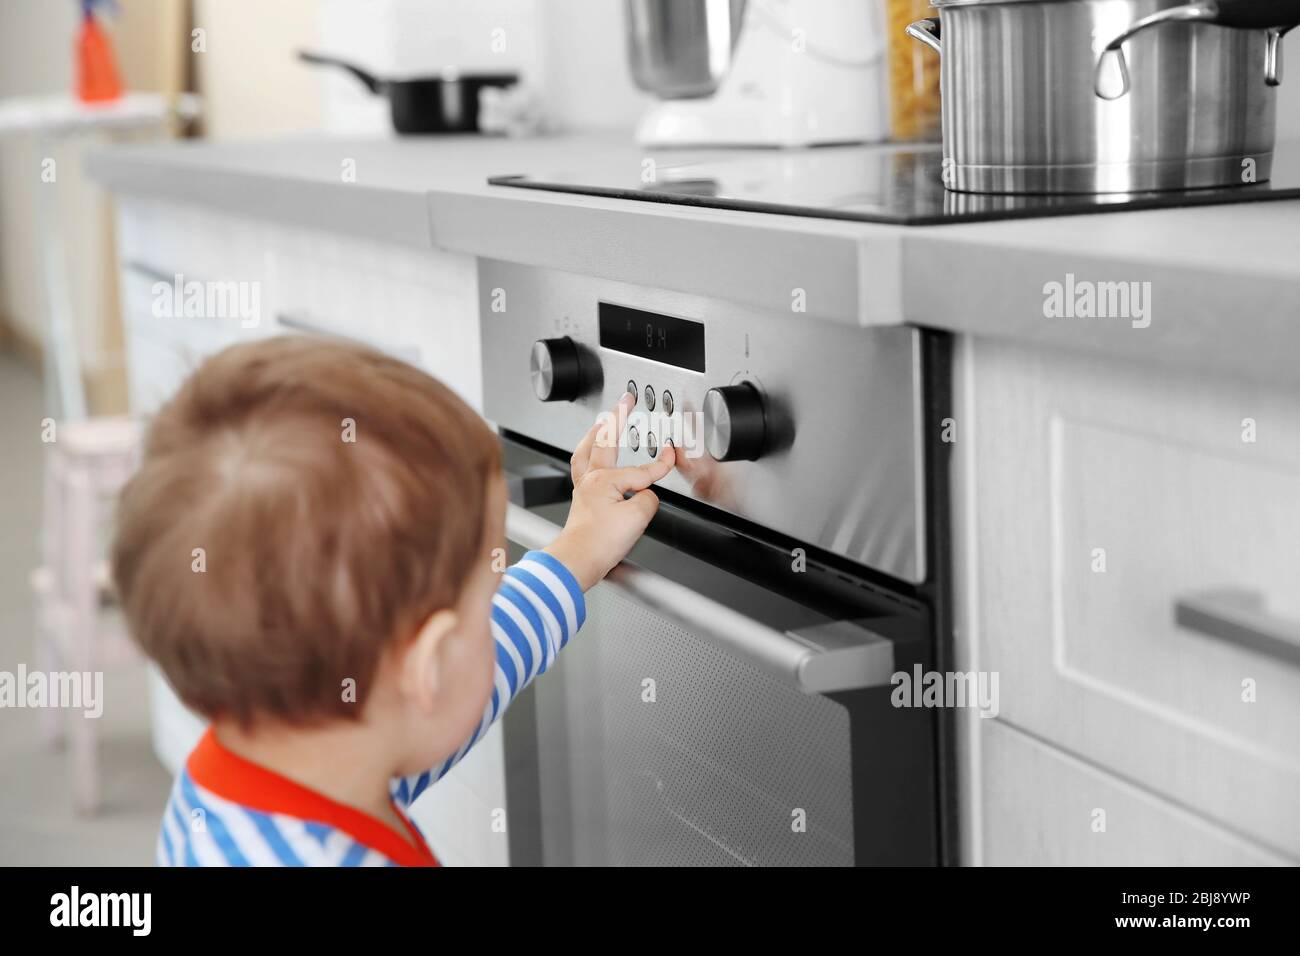 Toddler boy touches hot stove in kitchen. Accident at home with children.  Child pulls a hand to a scorching pan Stock Photo